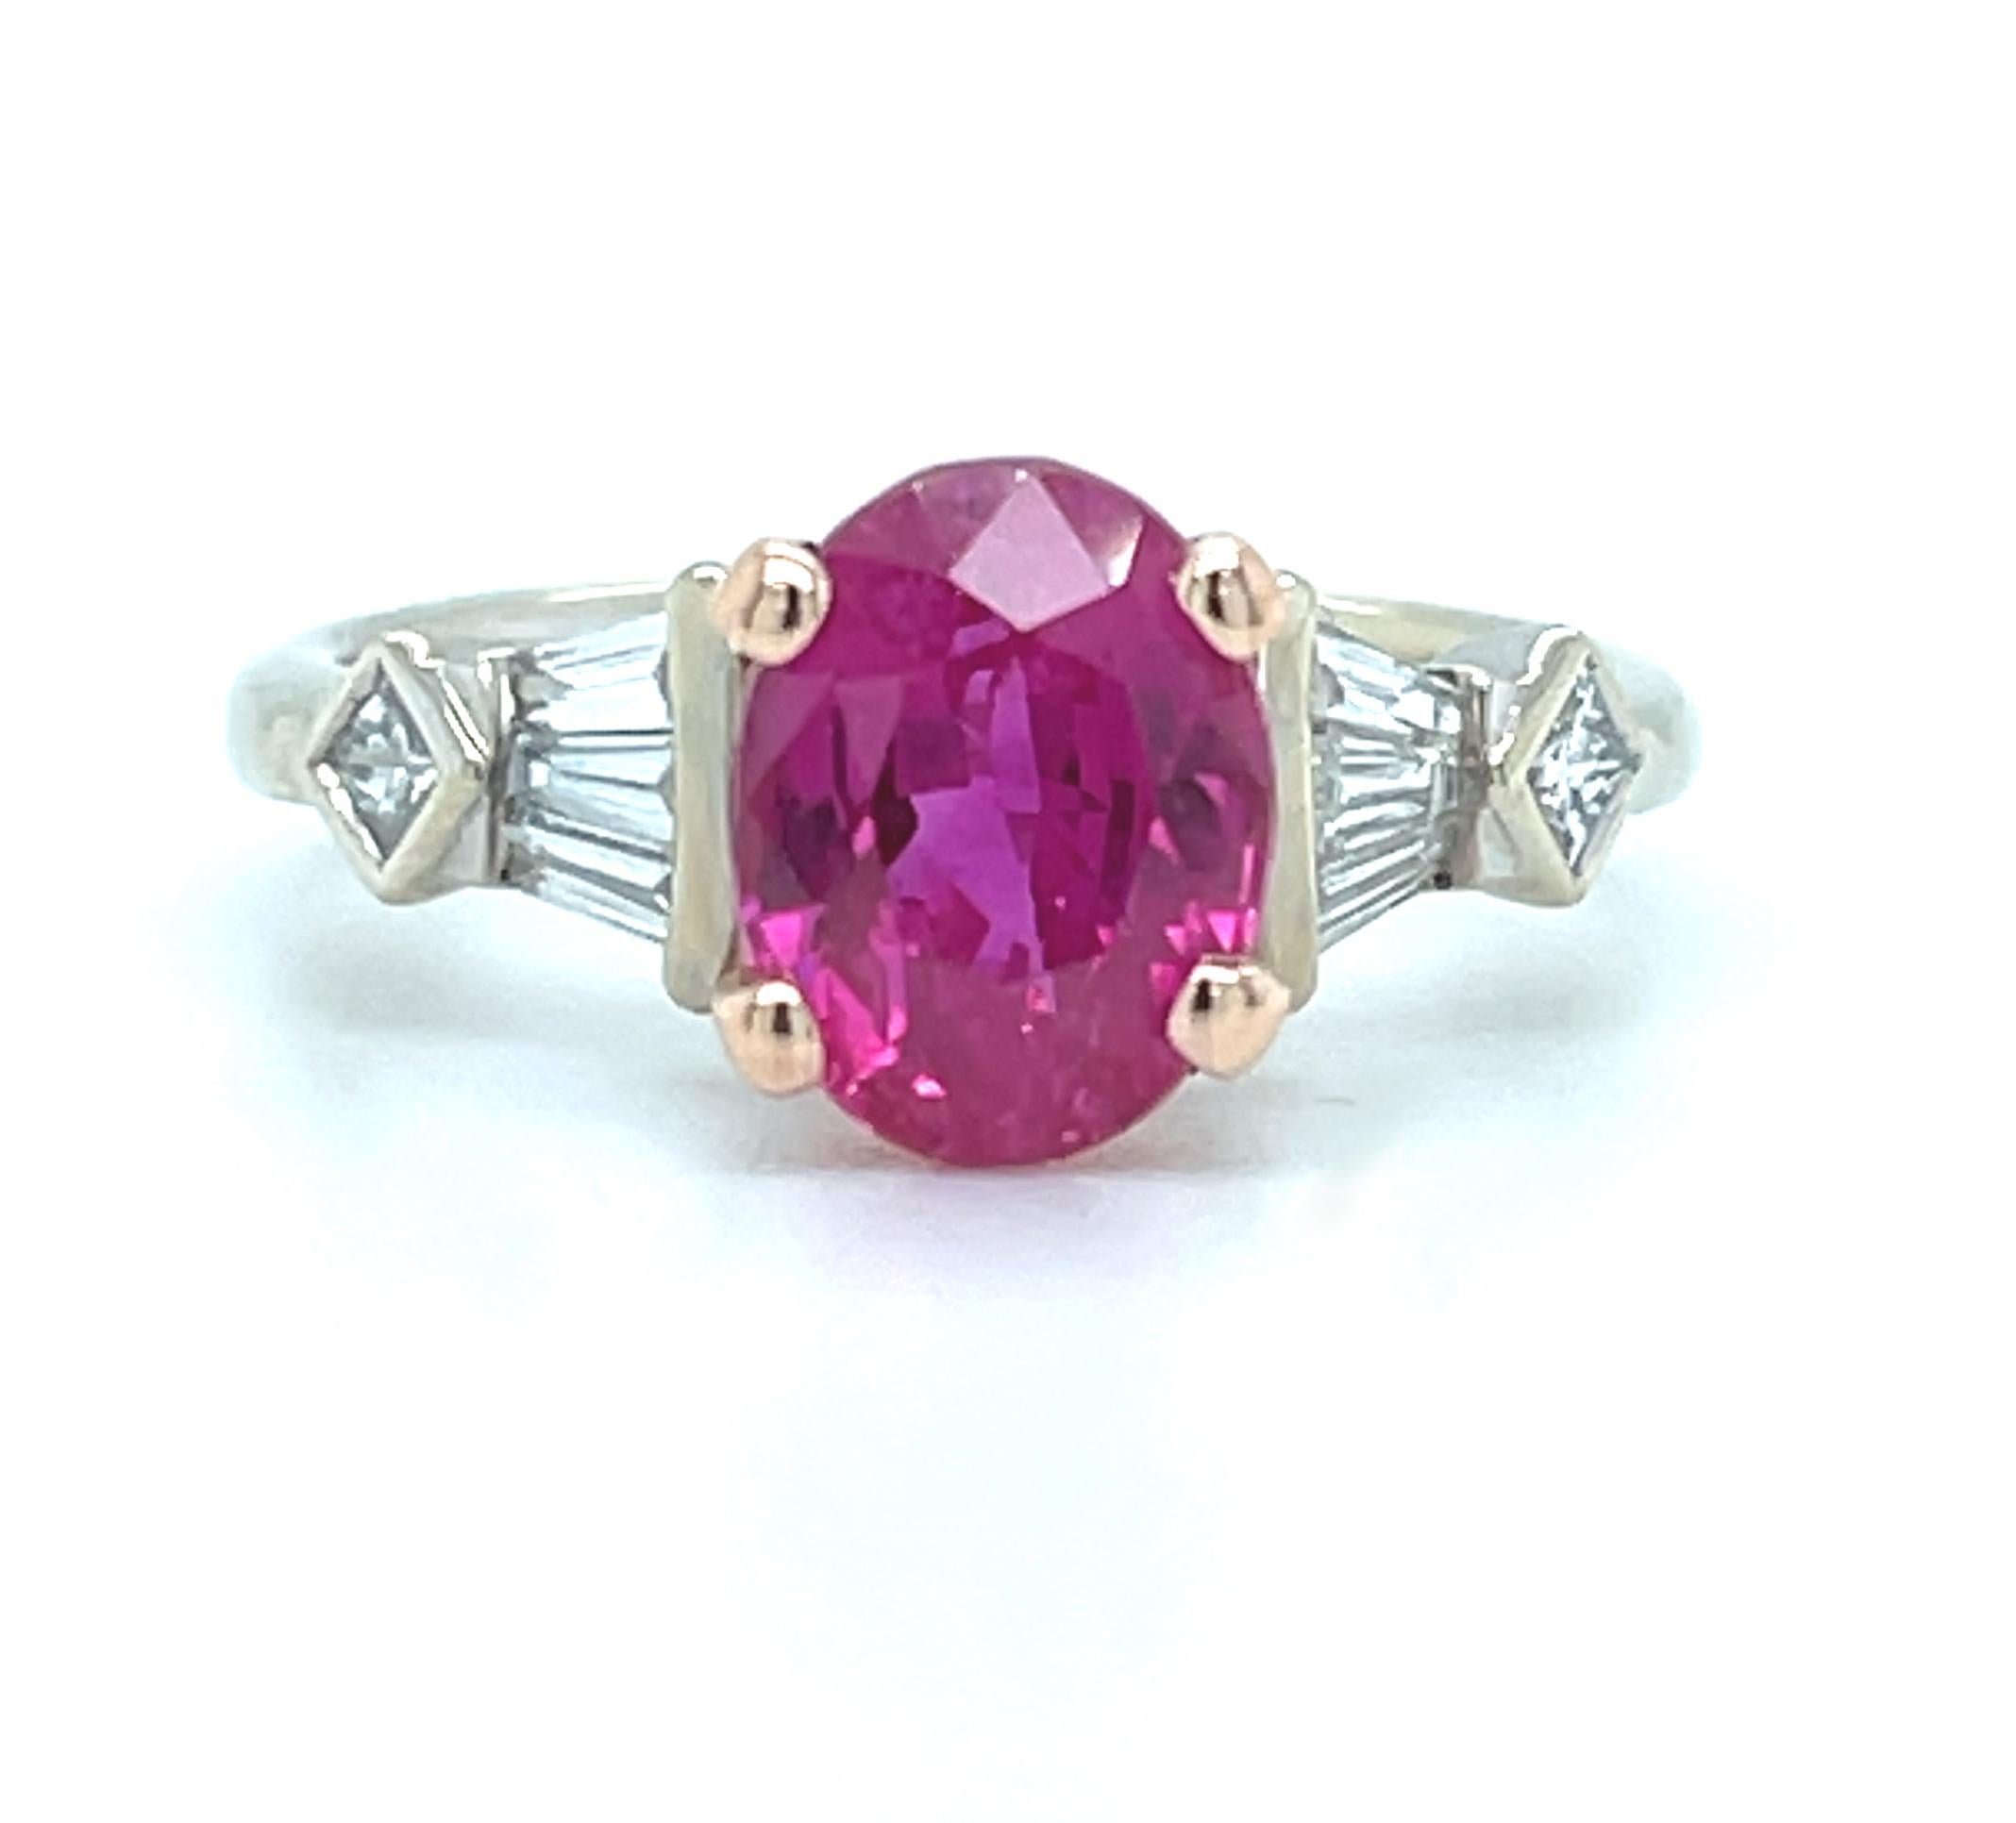 The intense color of the gorgeous pink sapphire in this ring can be described as 